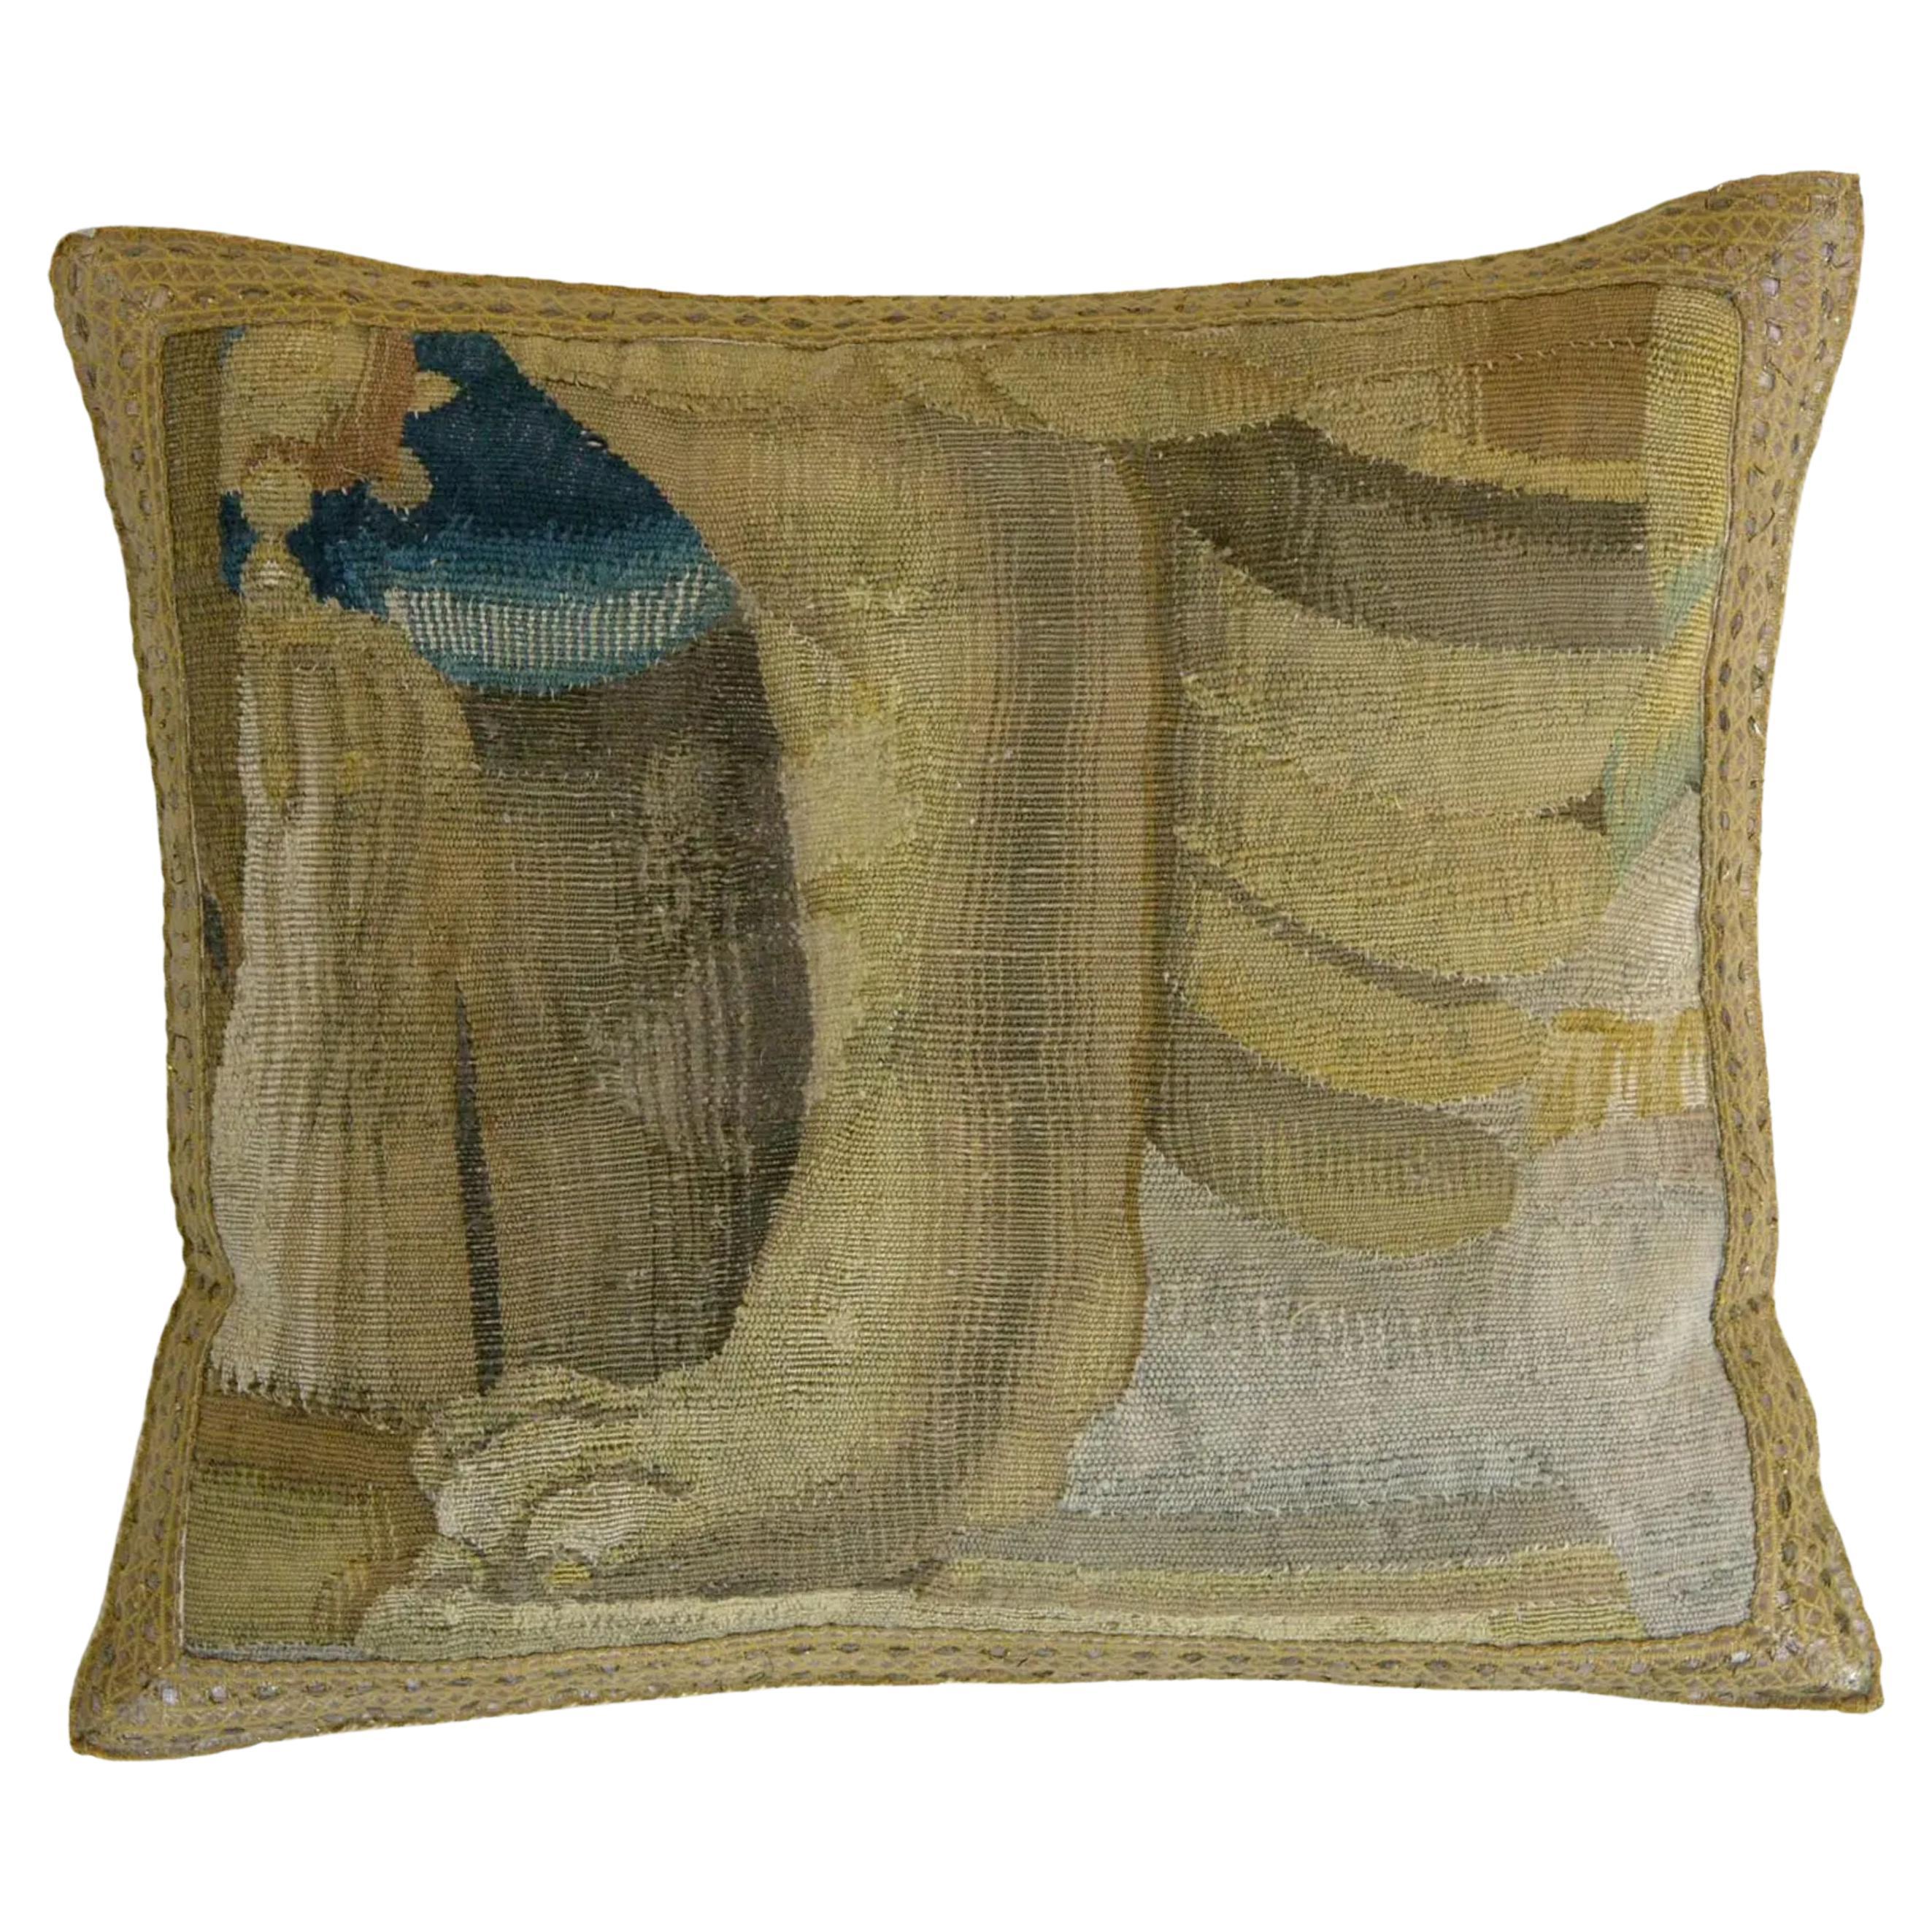 16th Century Antique a Brussels Baroque Tapestry Pillow - 17'' X 16'' For Sale